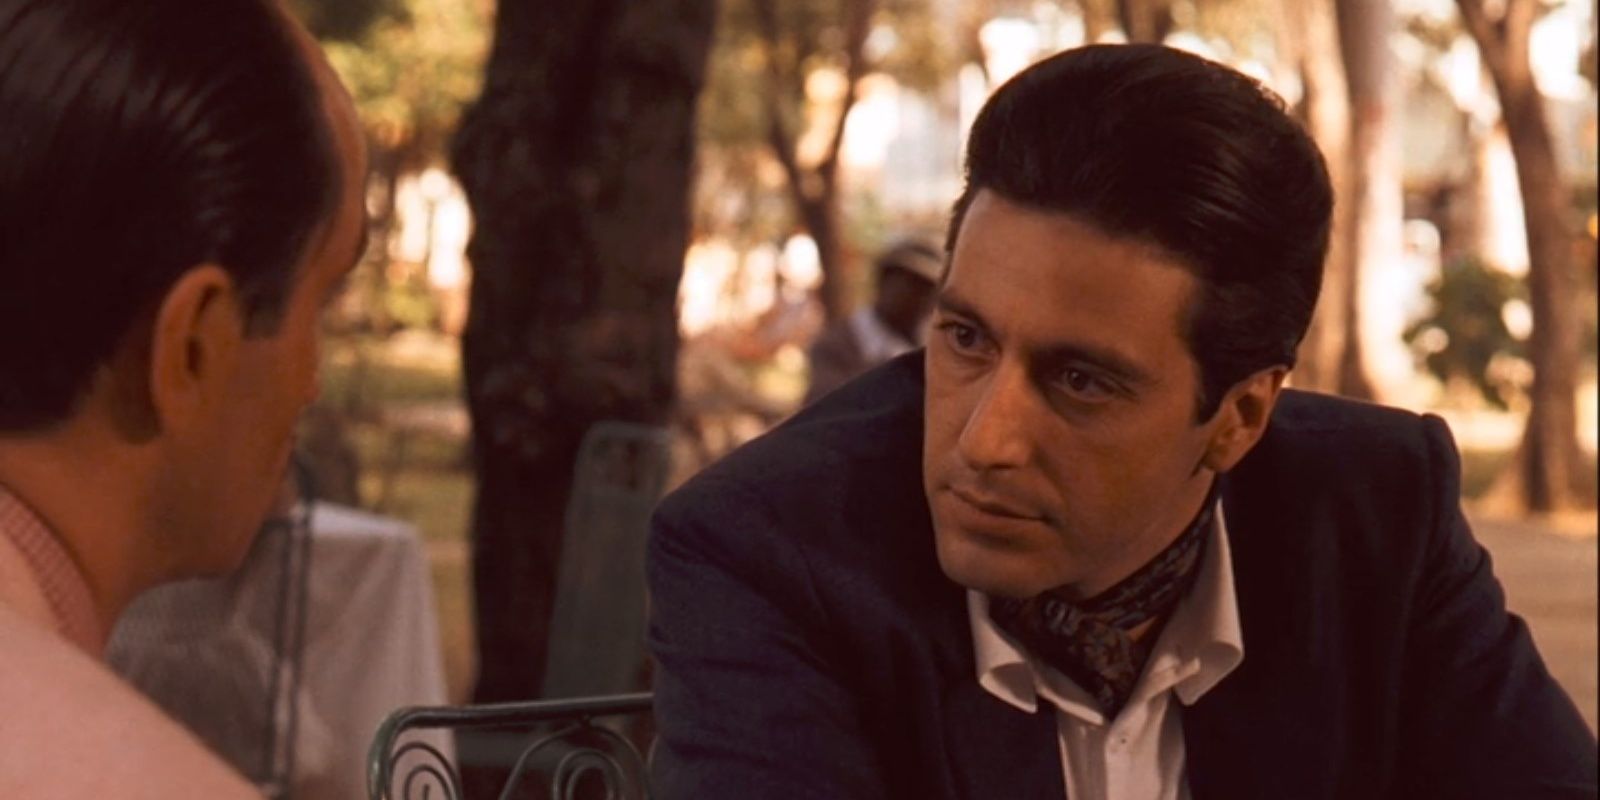 Michael Corleone staring intensely at someone in The Godfather: Part II.